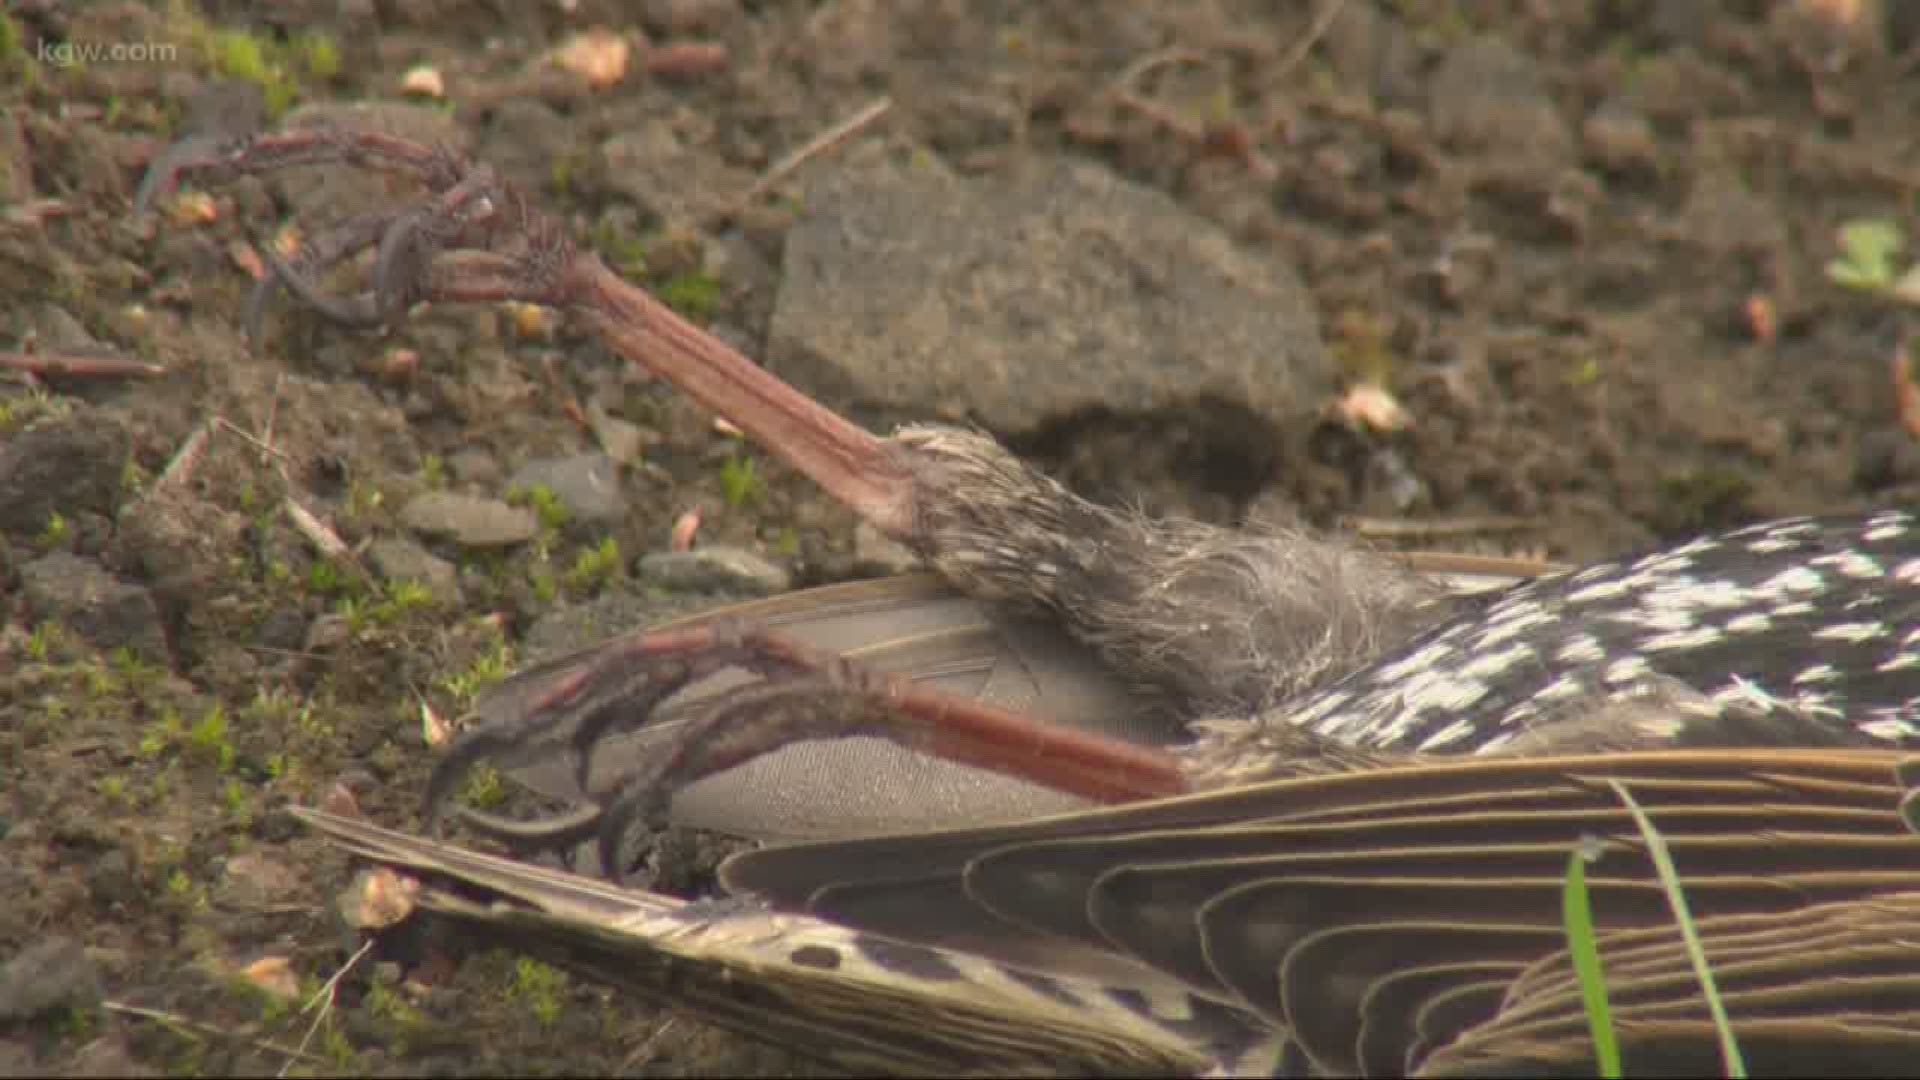 Why are birds dying in Hillsboro? An investigation is underway.